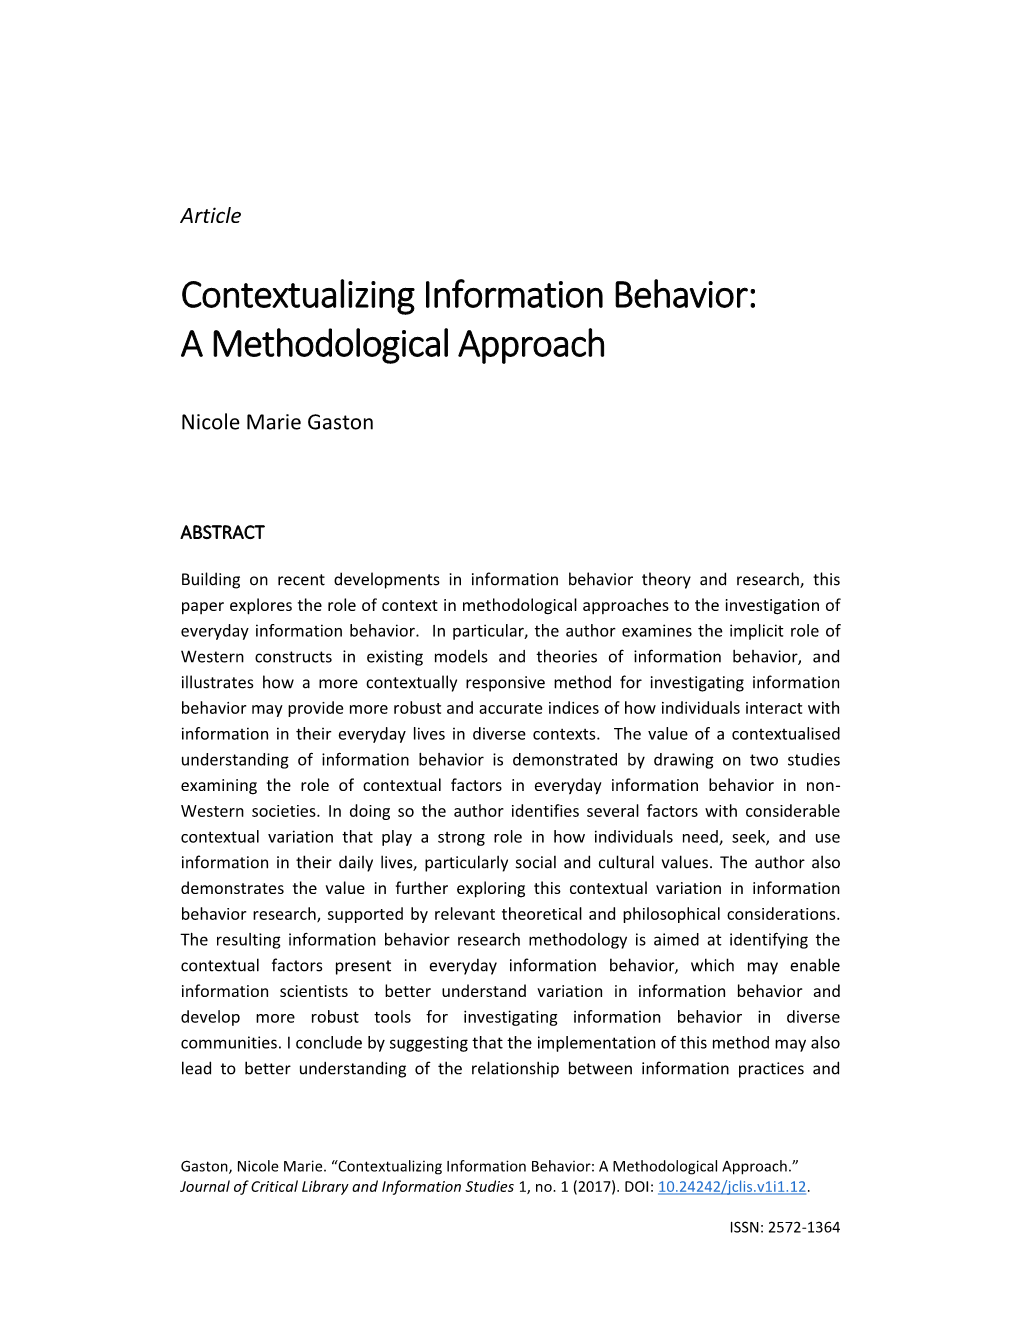 Contextualizing Information Behavior: a Methodological Approach